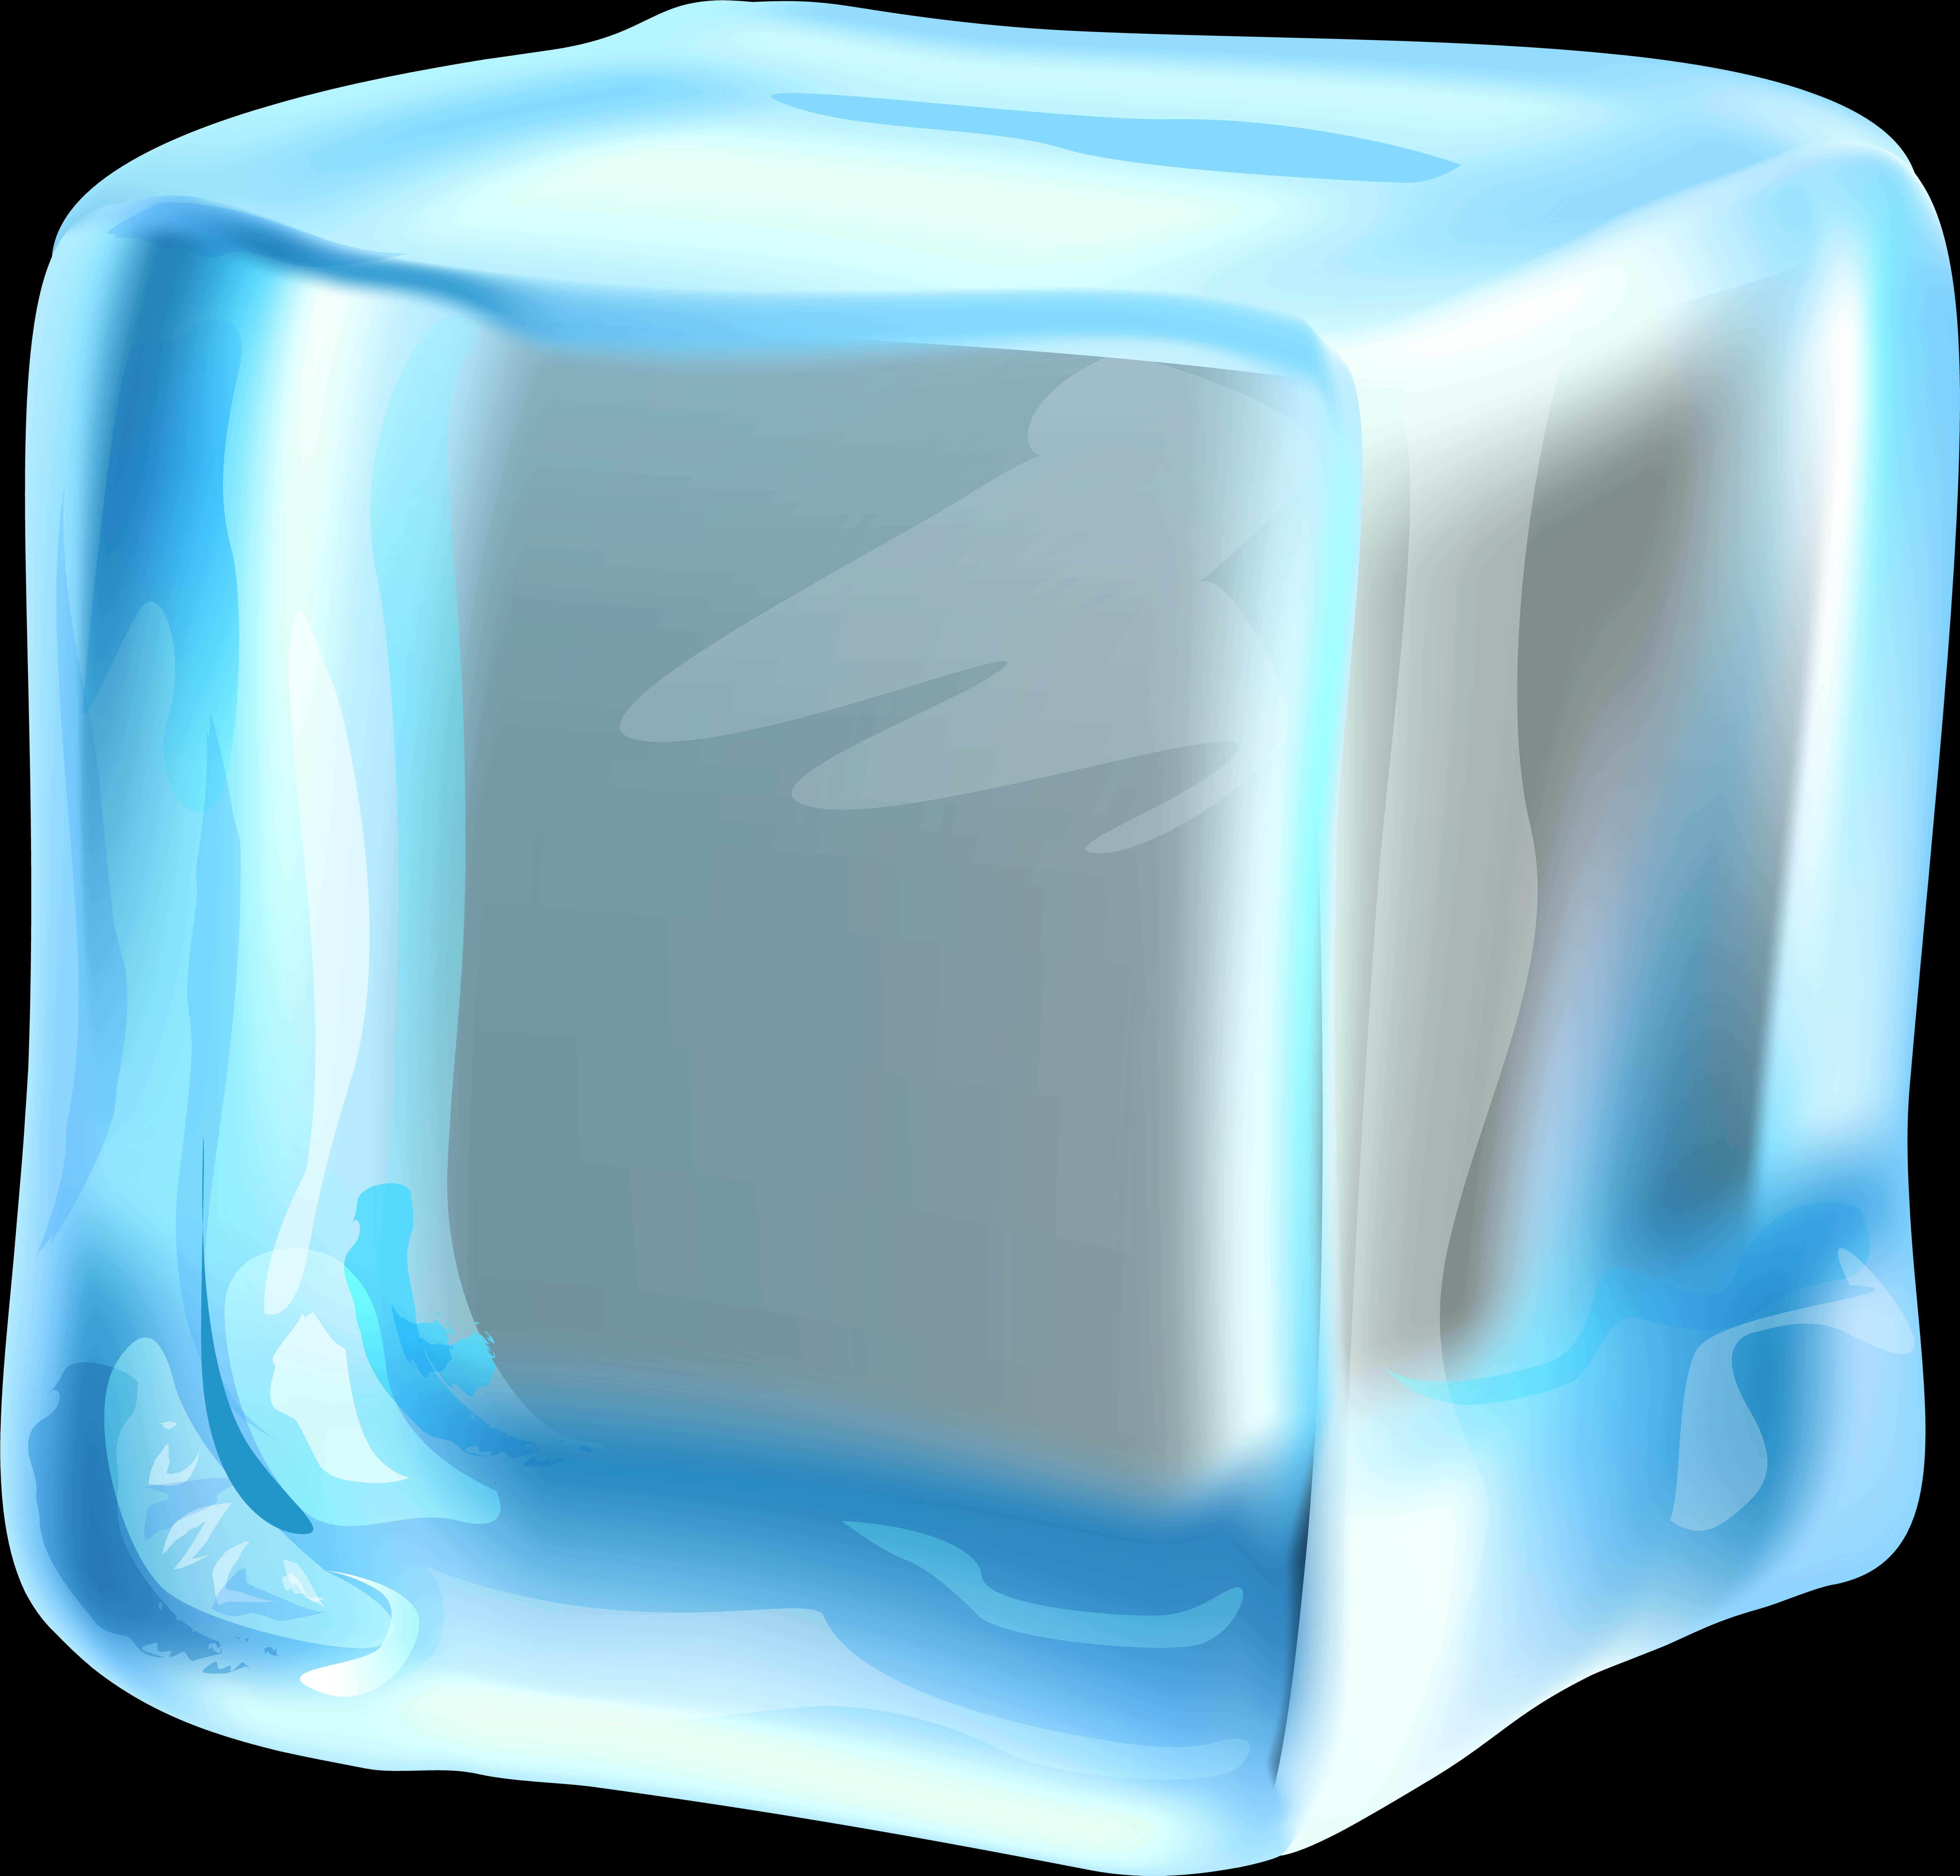 Glossy Ice Cube Illustration PNG